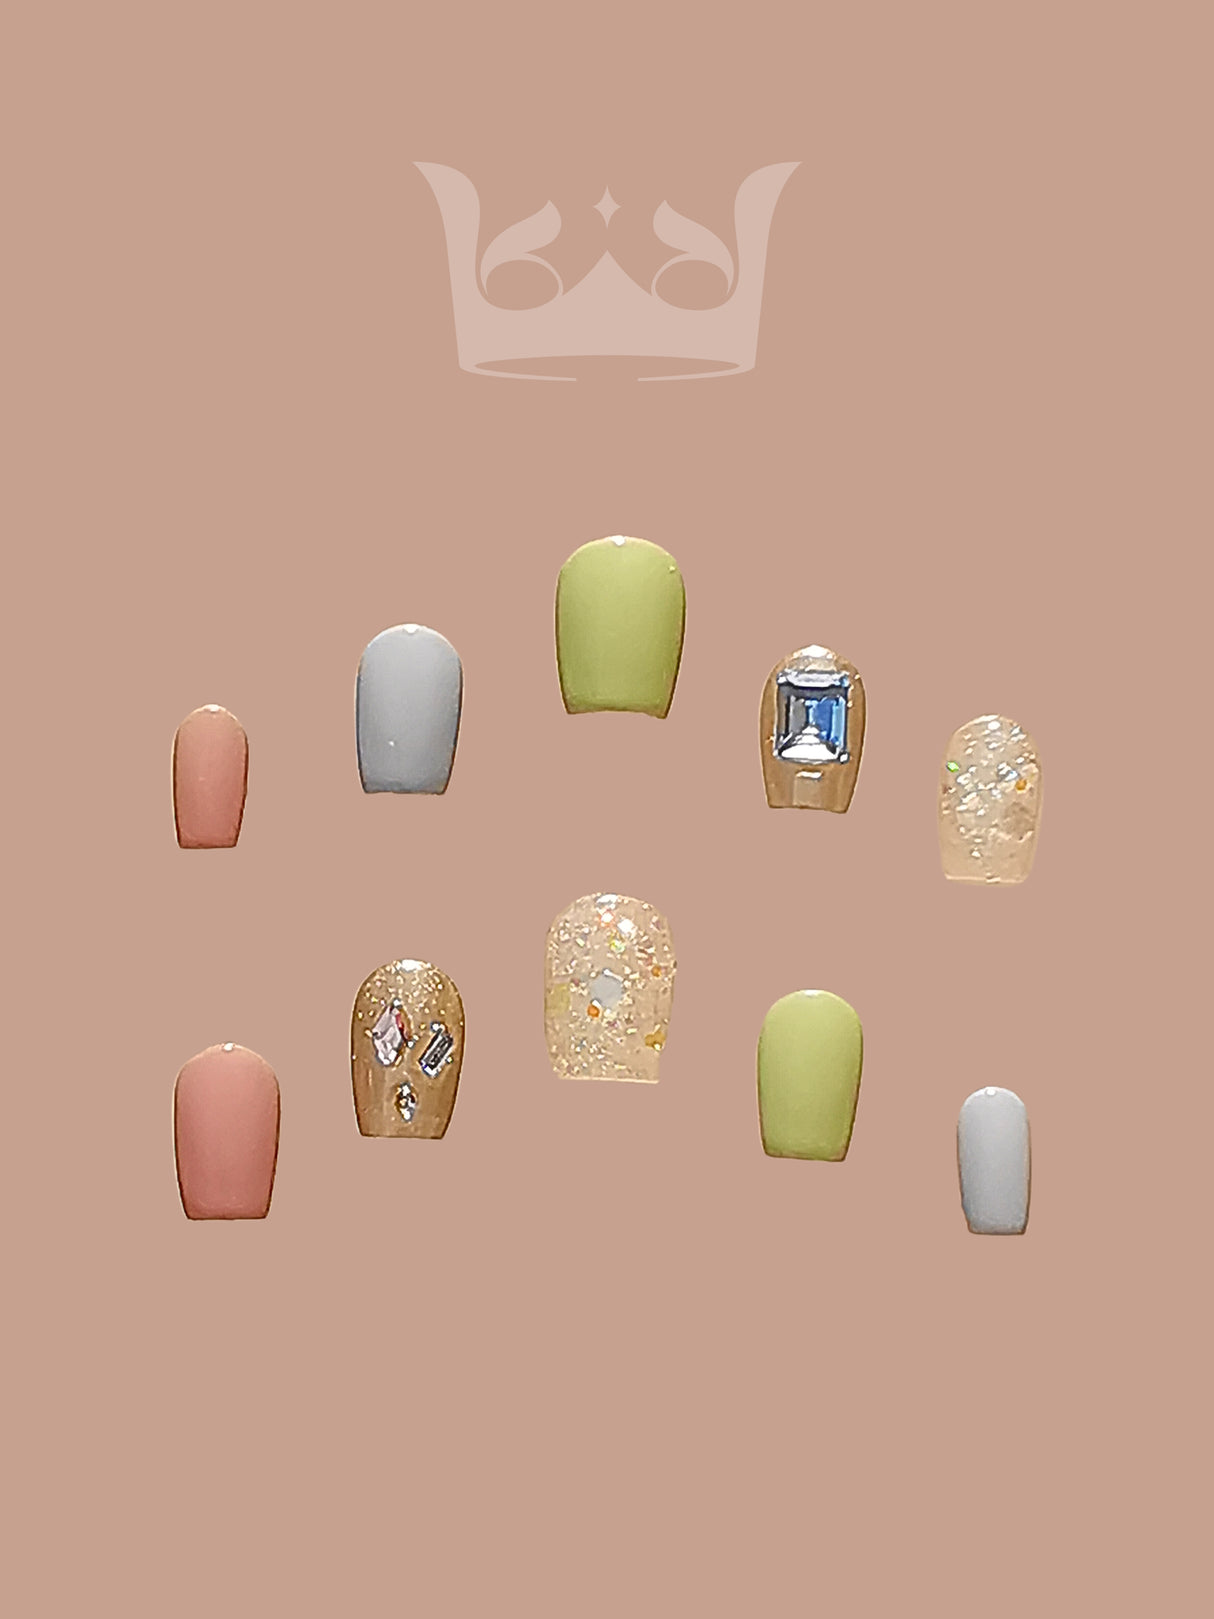 These acrylic nails are for cosmetic purposes, with a variety of colors, designs, shapes, and sizes for personal expression. Embellishments add glamour